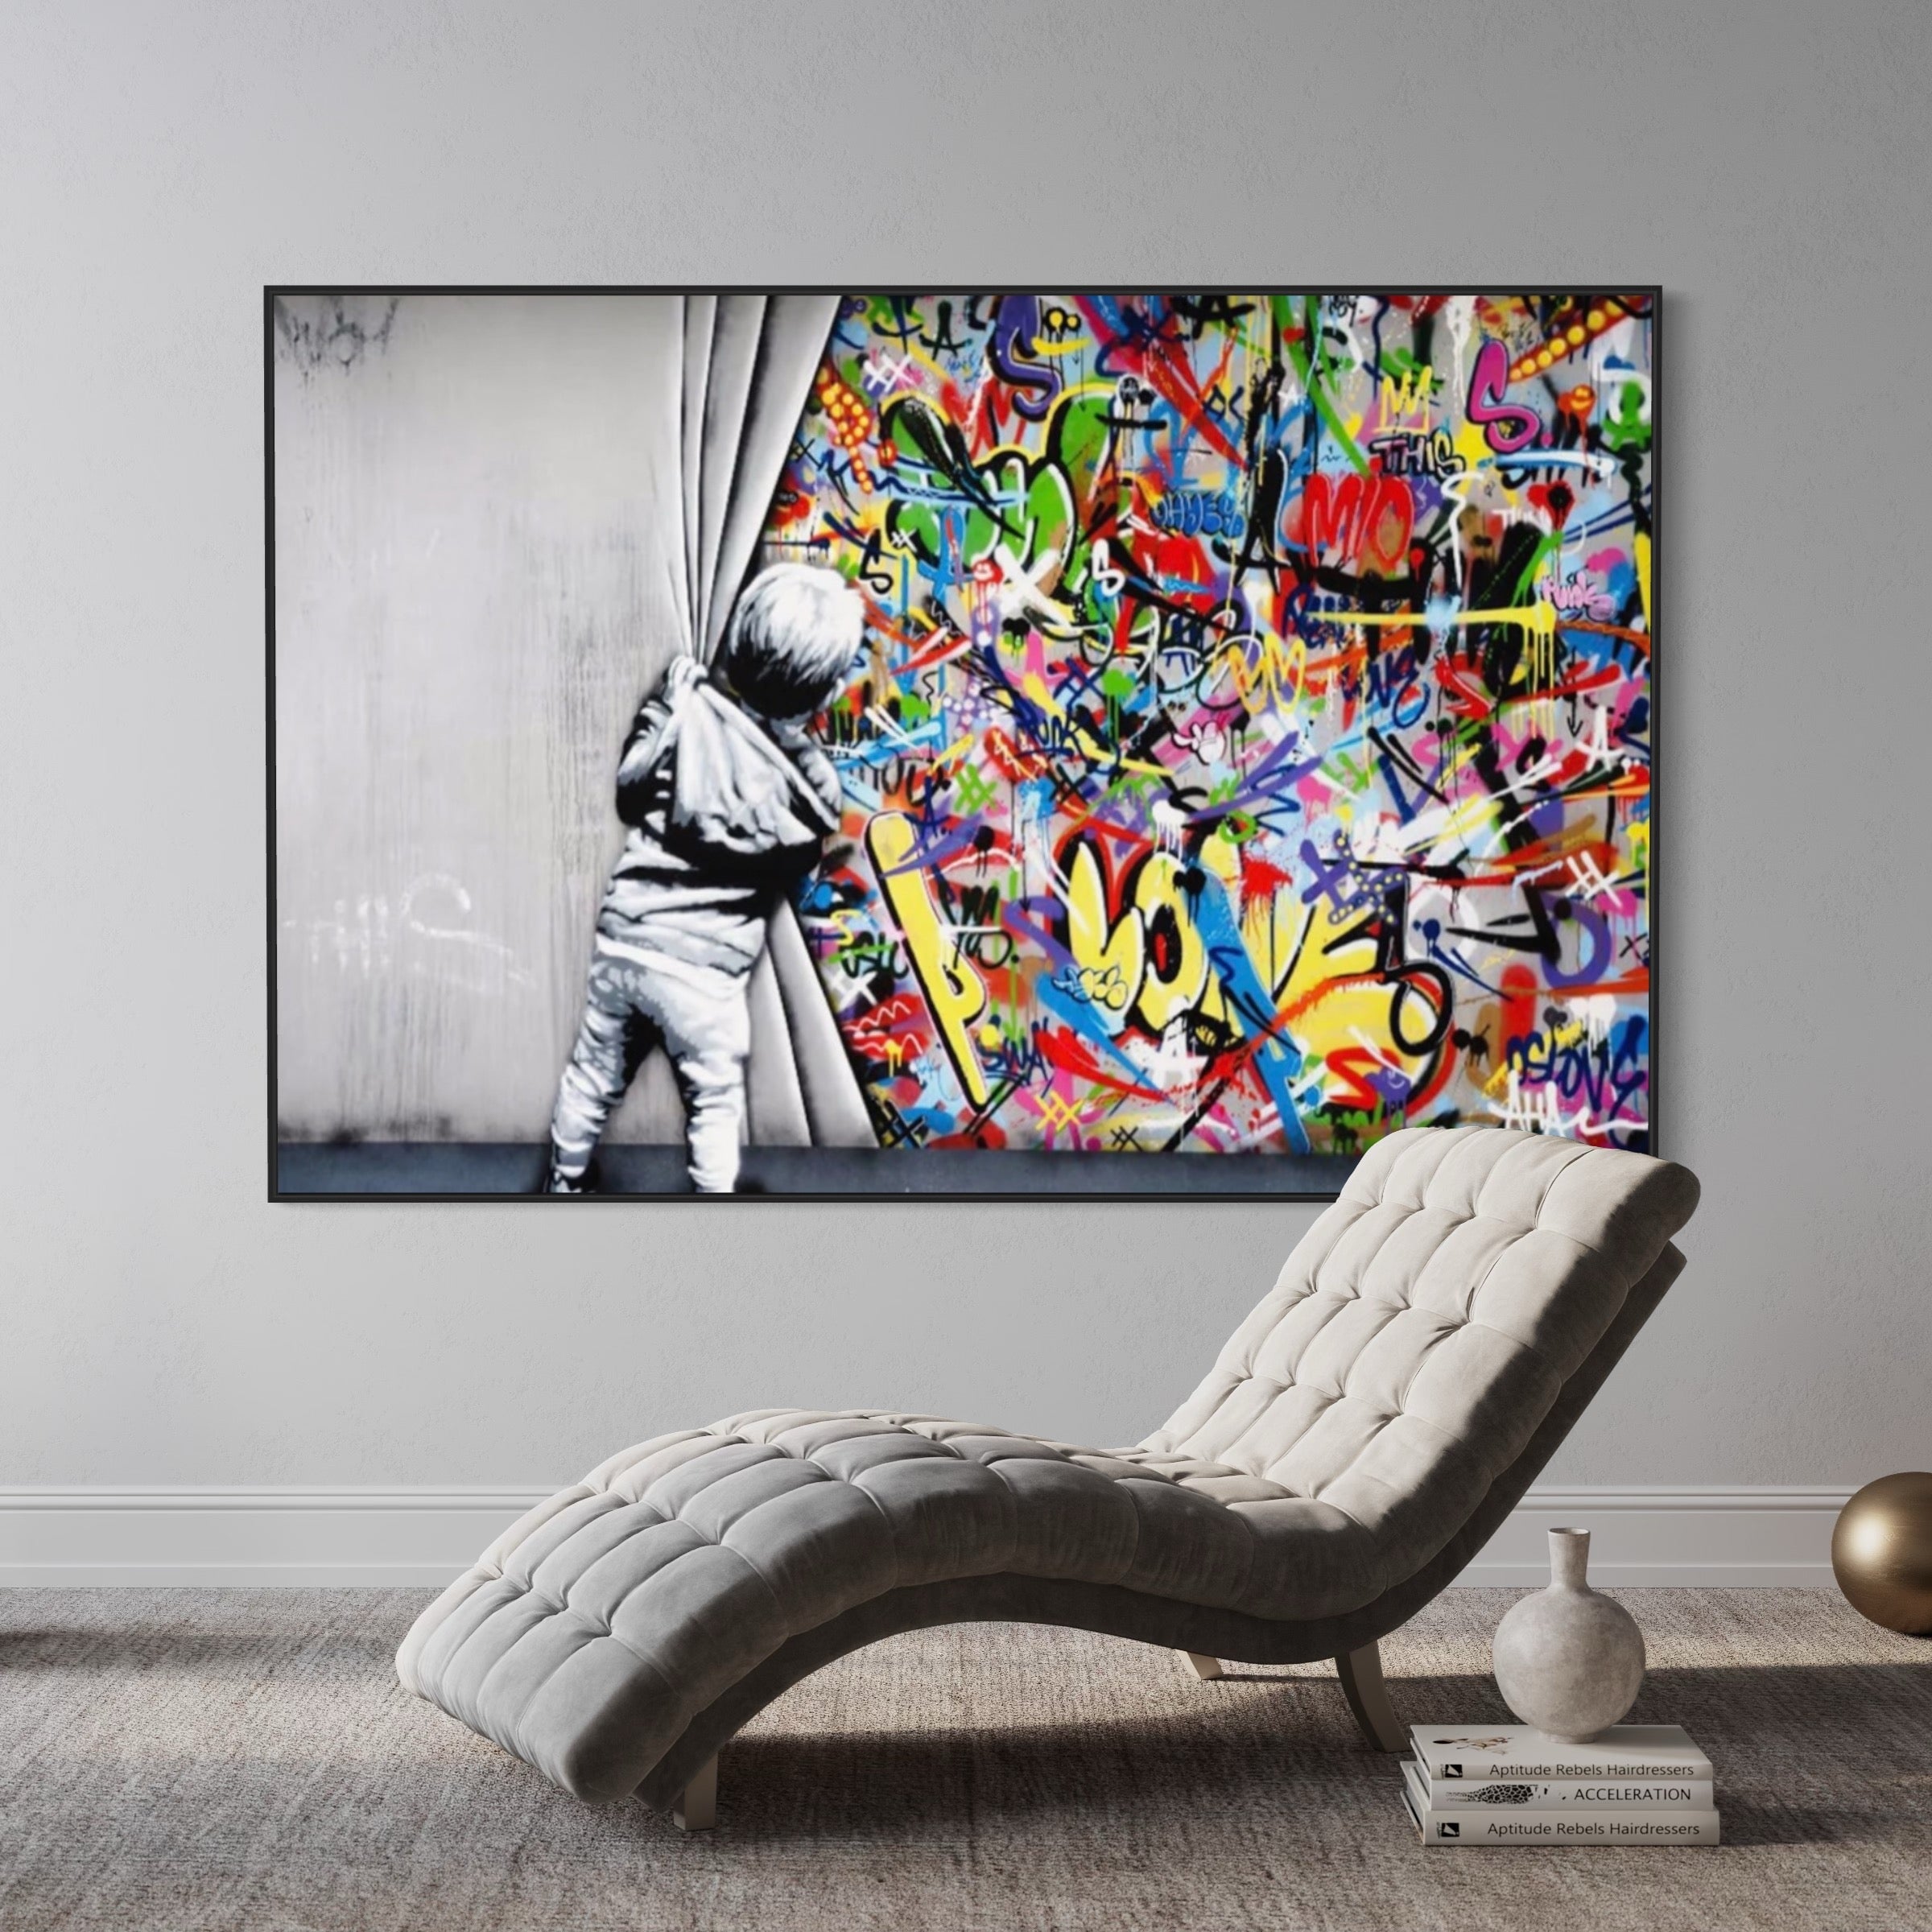 Graffiti Canvas Wall Art Painting "Behind the Curtain" 100% Hand-Painted